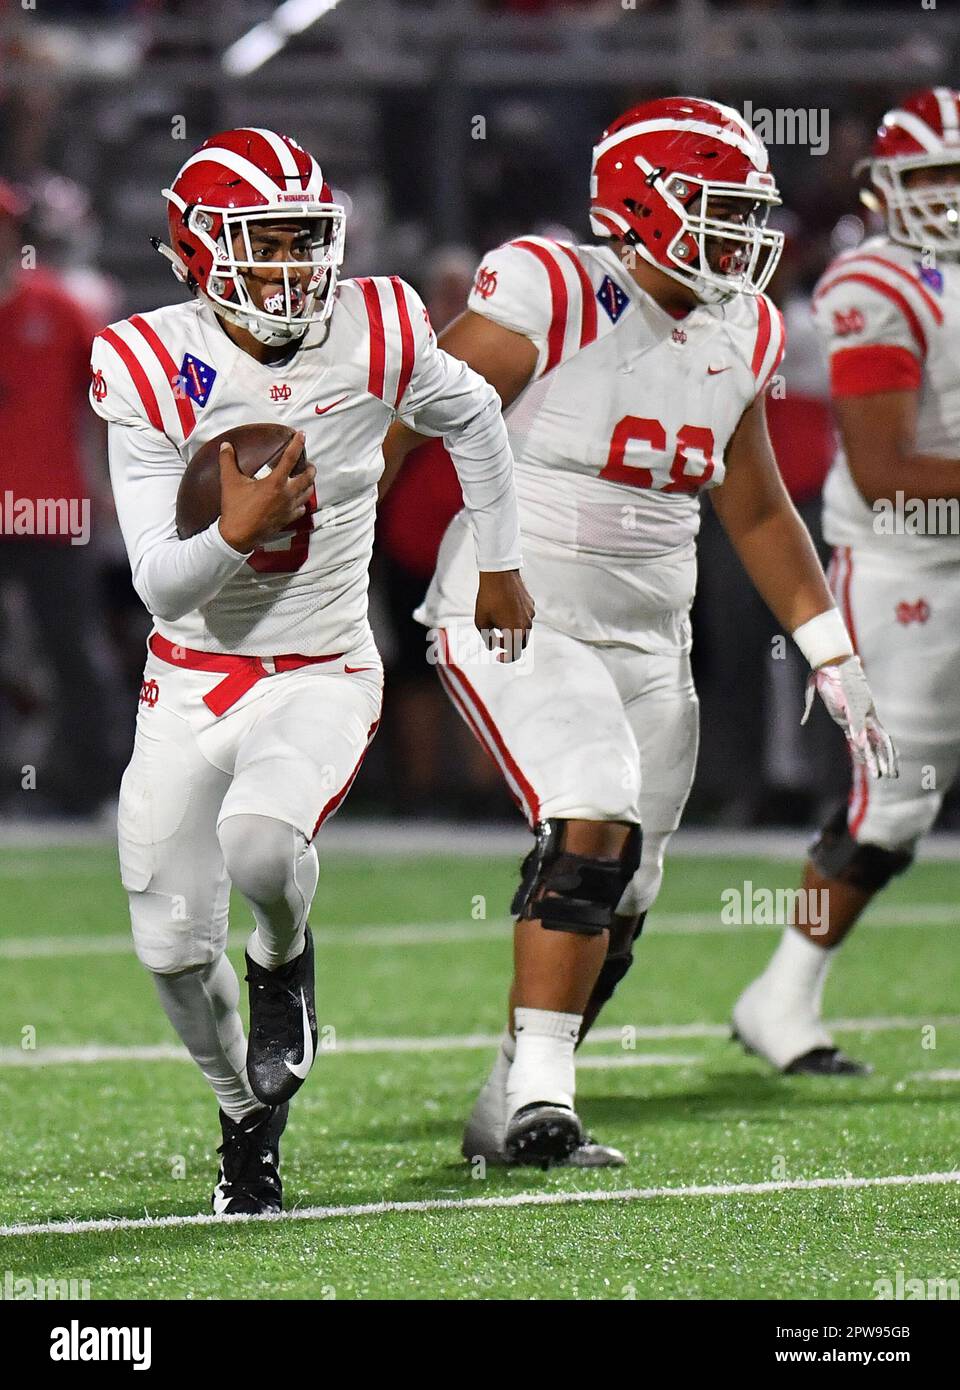 October 25, 2019 Bellflower, CA.Top Prep Quarterback prospect Bryce Young #9 of Mater Dei in action vs. St. John Bosco.Mater Dei Monarchs vs. St. John Bosco Braves.Louis Lopez/Modern Exposure/Cal Sport Media. Stock Photo